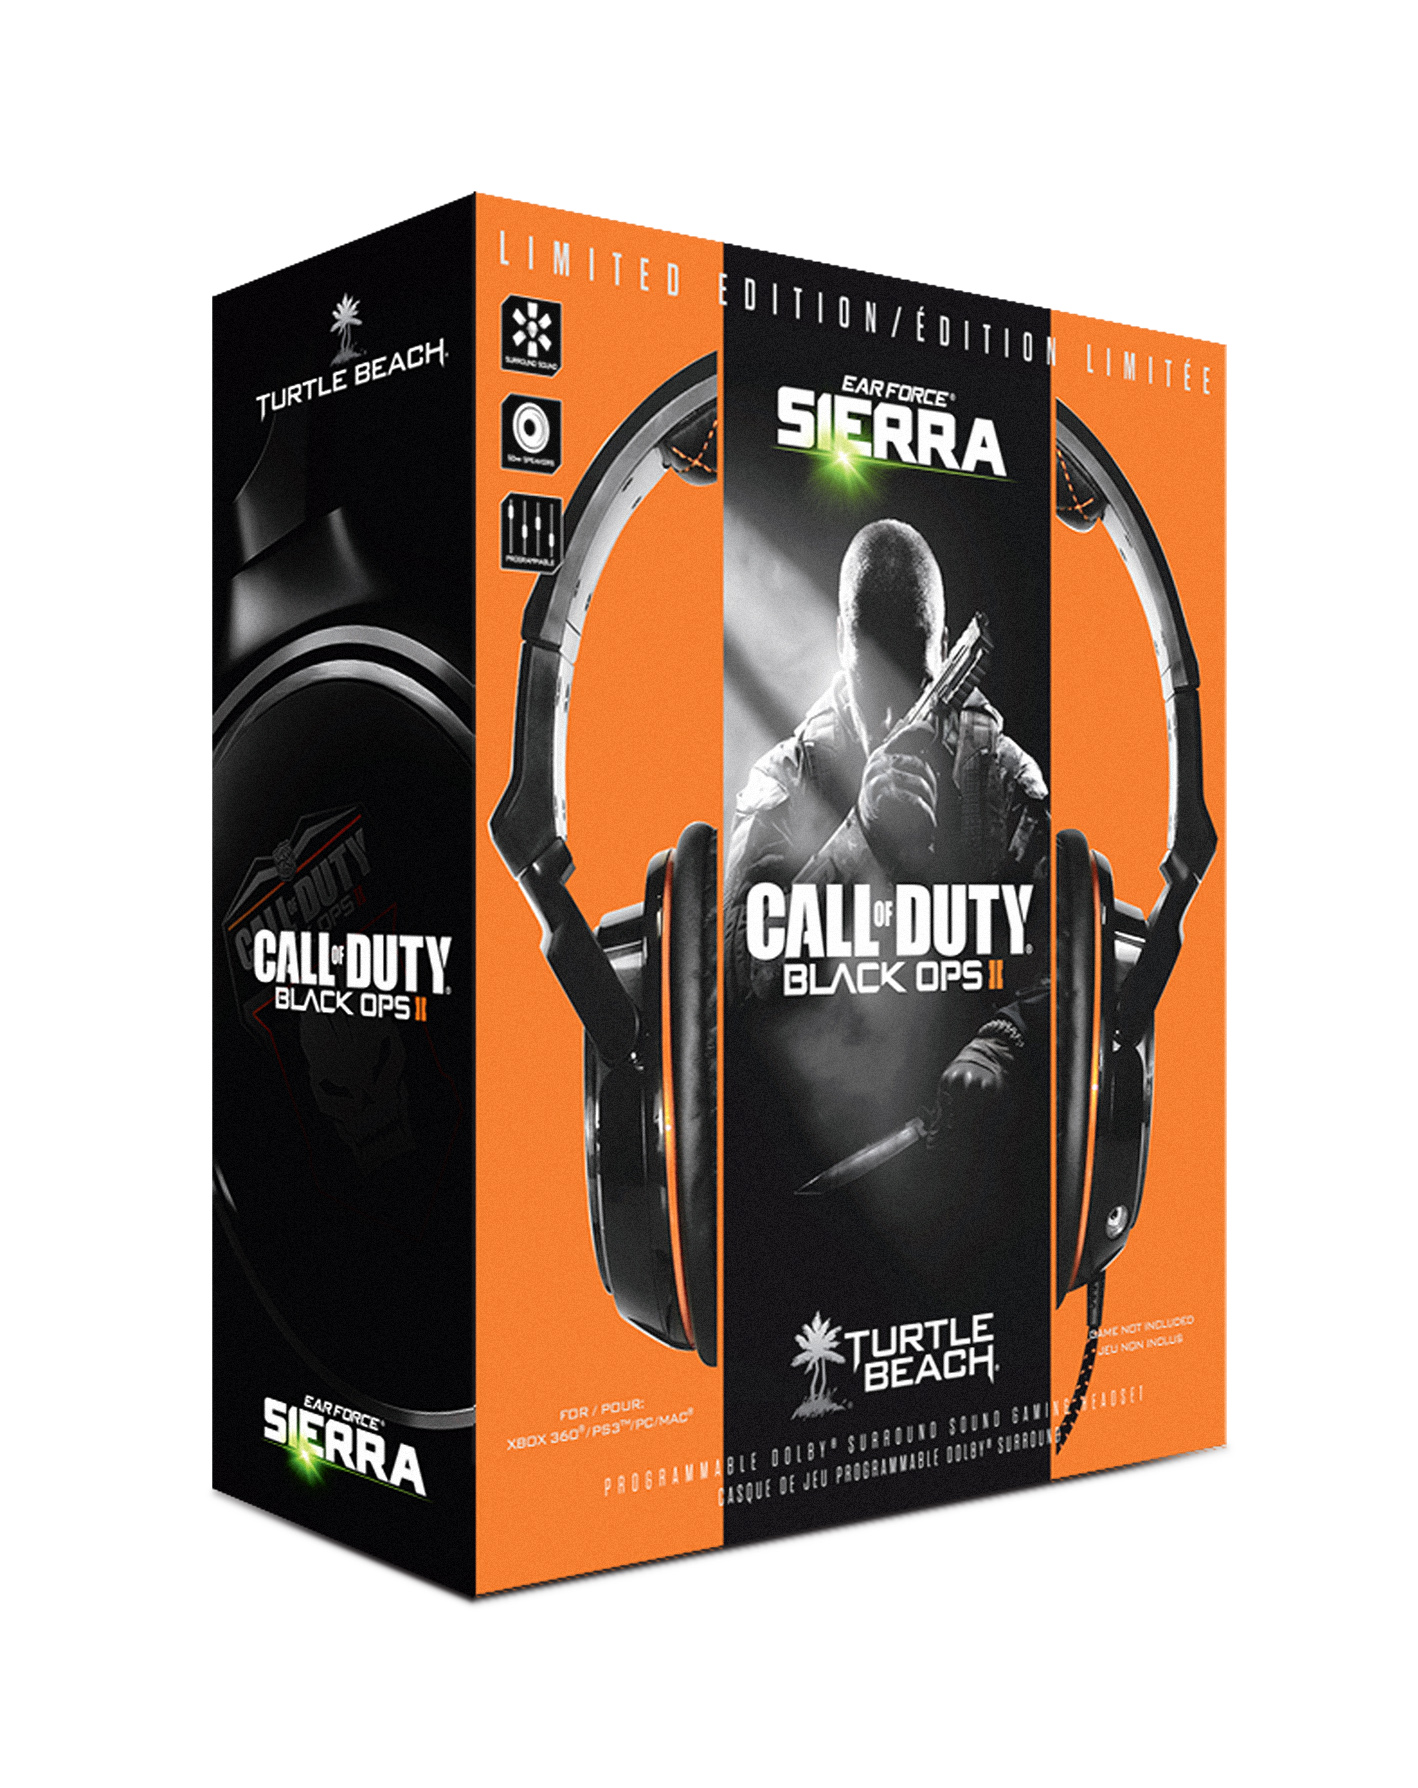 Turtle Beach Updates Headset Line With Call Of Duty Black Ops 2